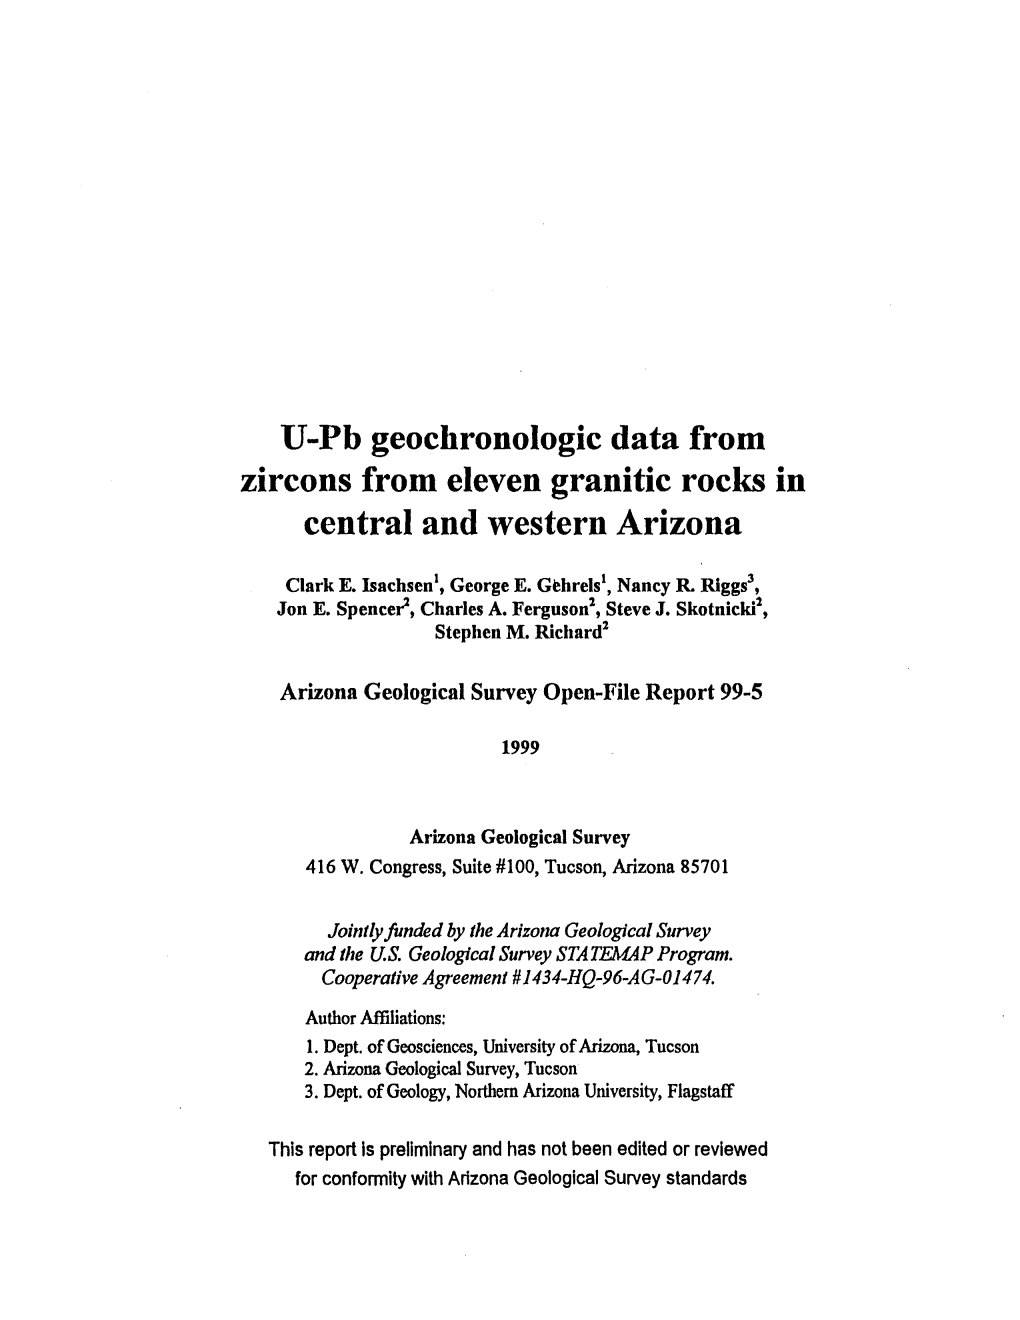 U-Pb Geochronologic Data from Zircons from Eleven Granitic Rocks in Central and Western Arizona